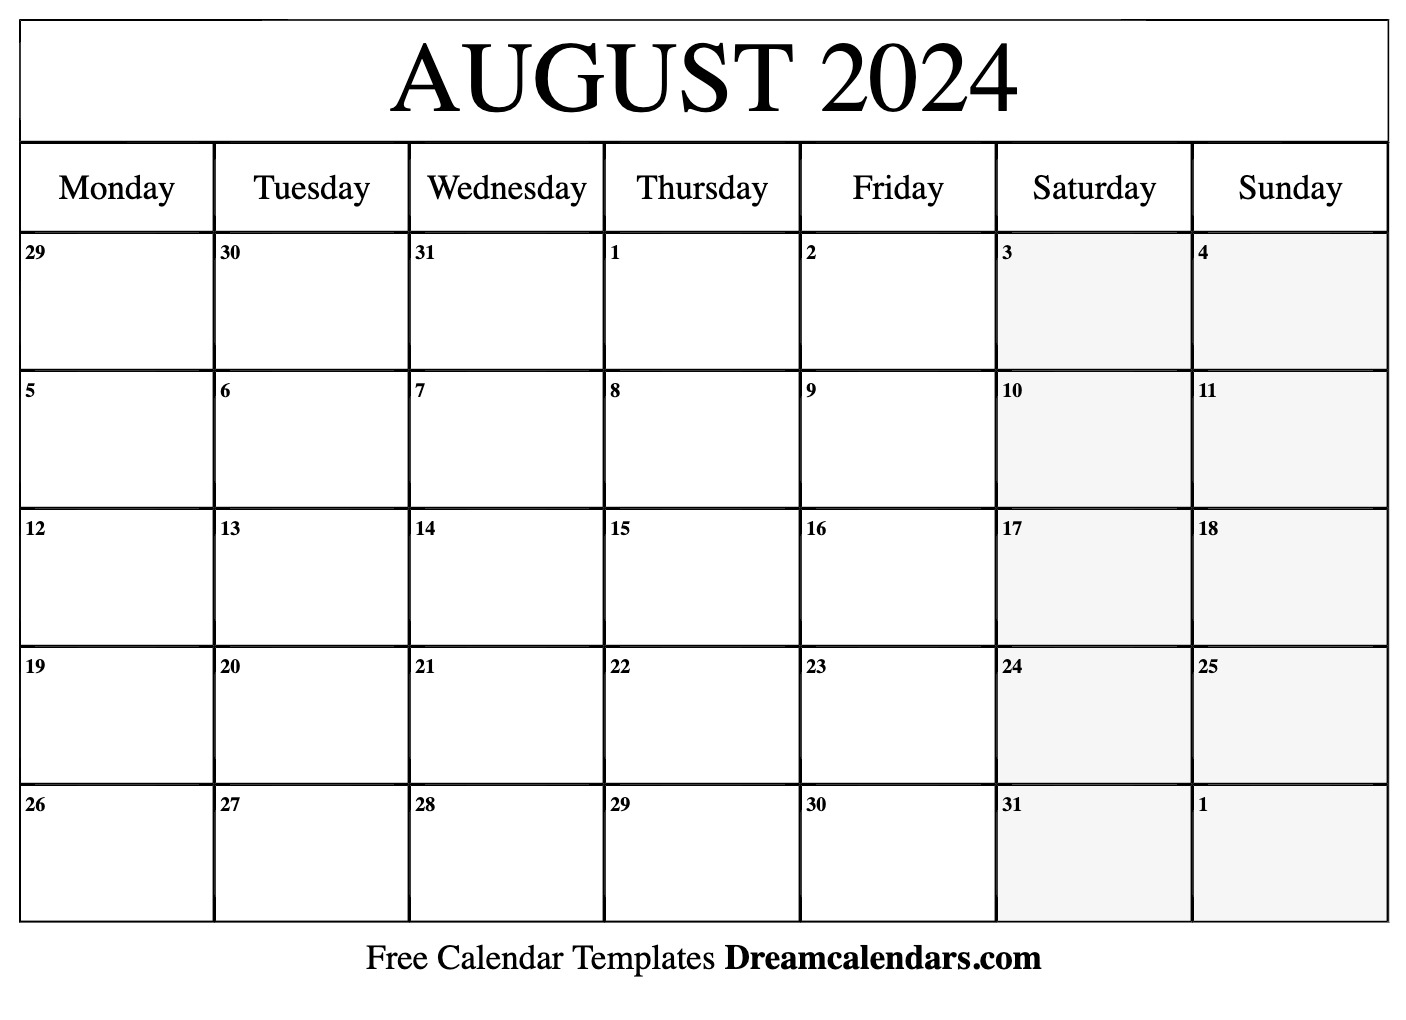 August 2024 Calendar | Free Blank Printable With Holidays for 2024 August Printable Calendar